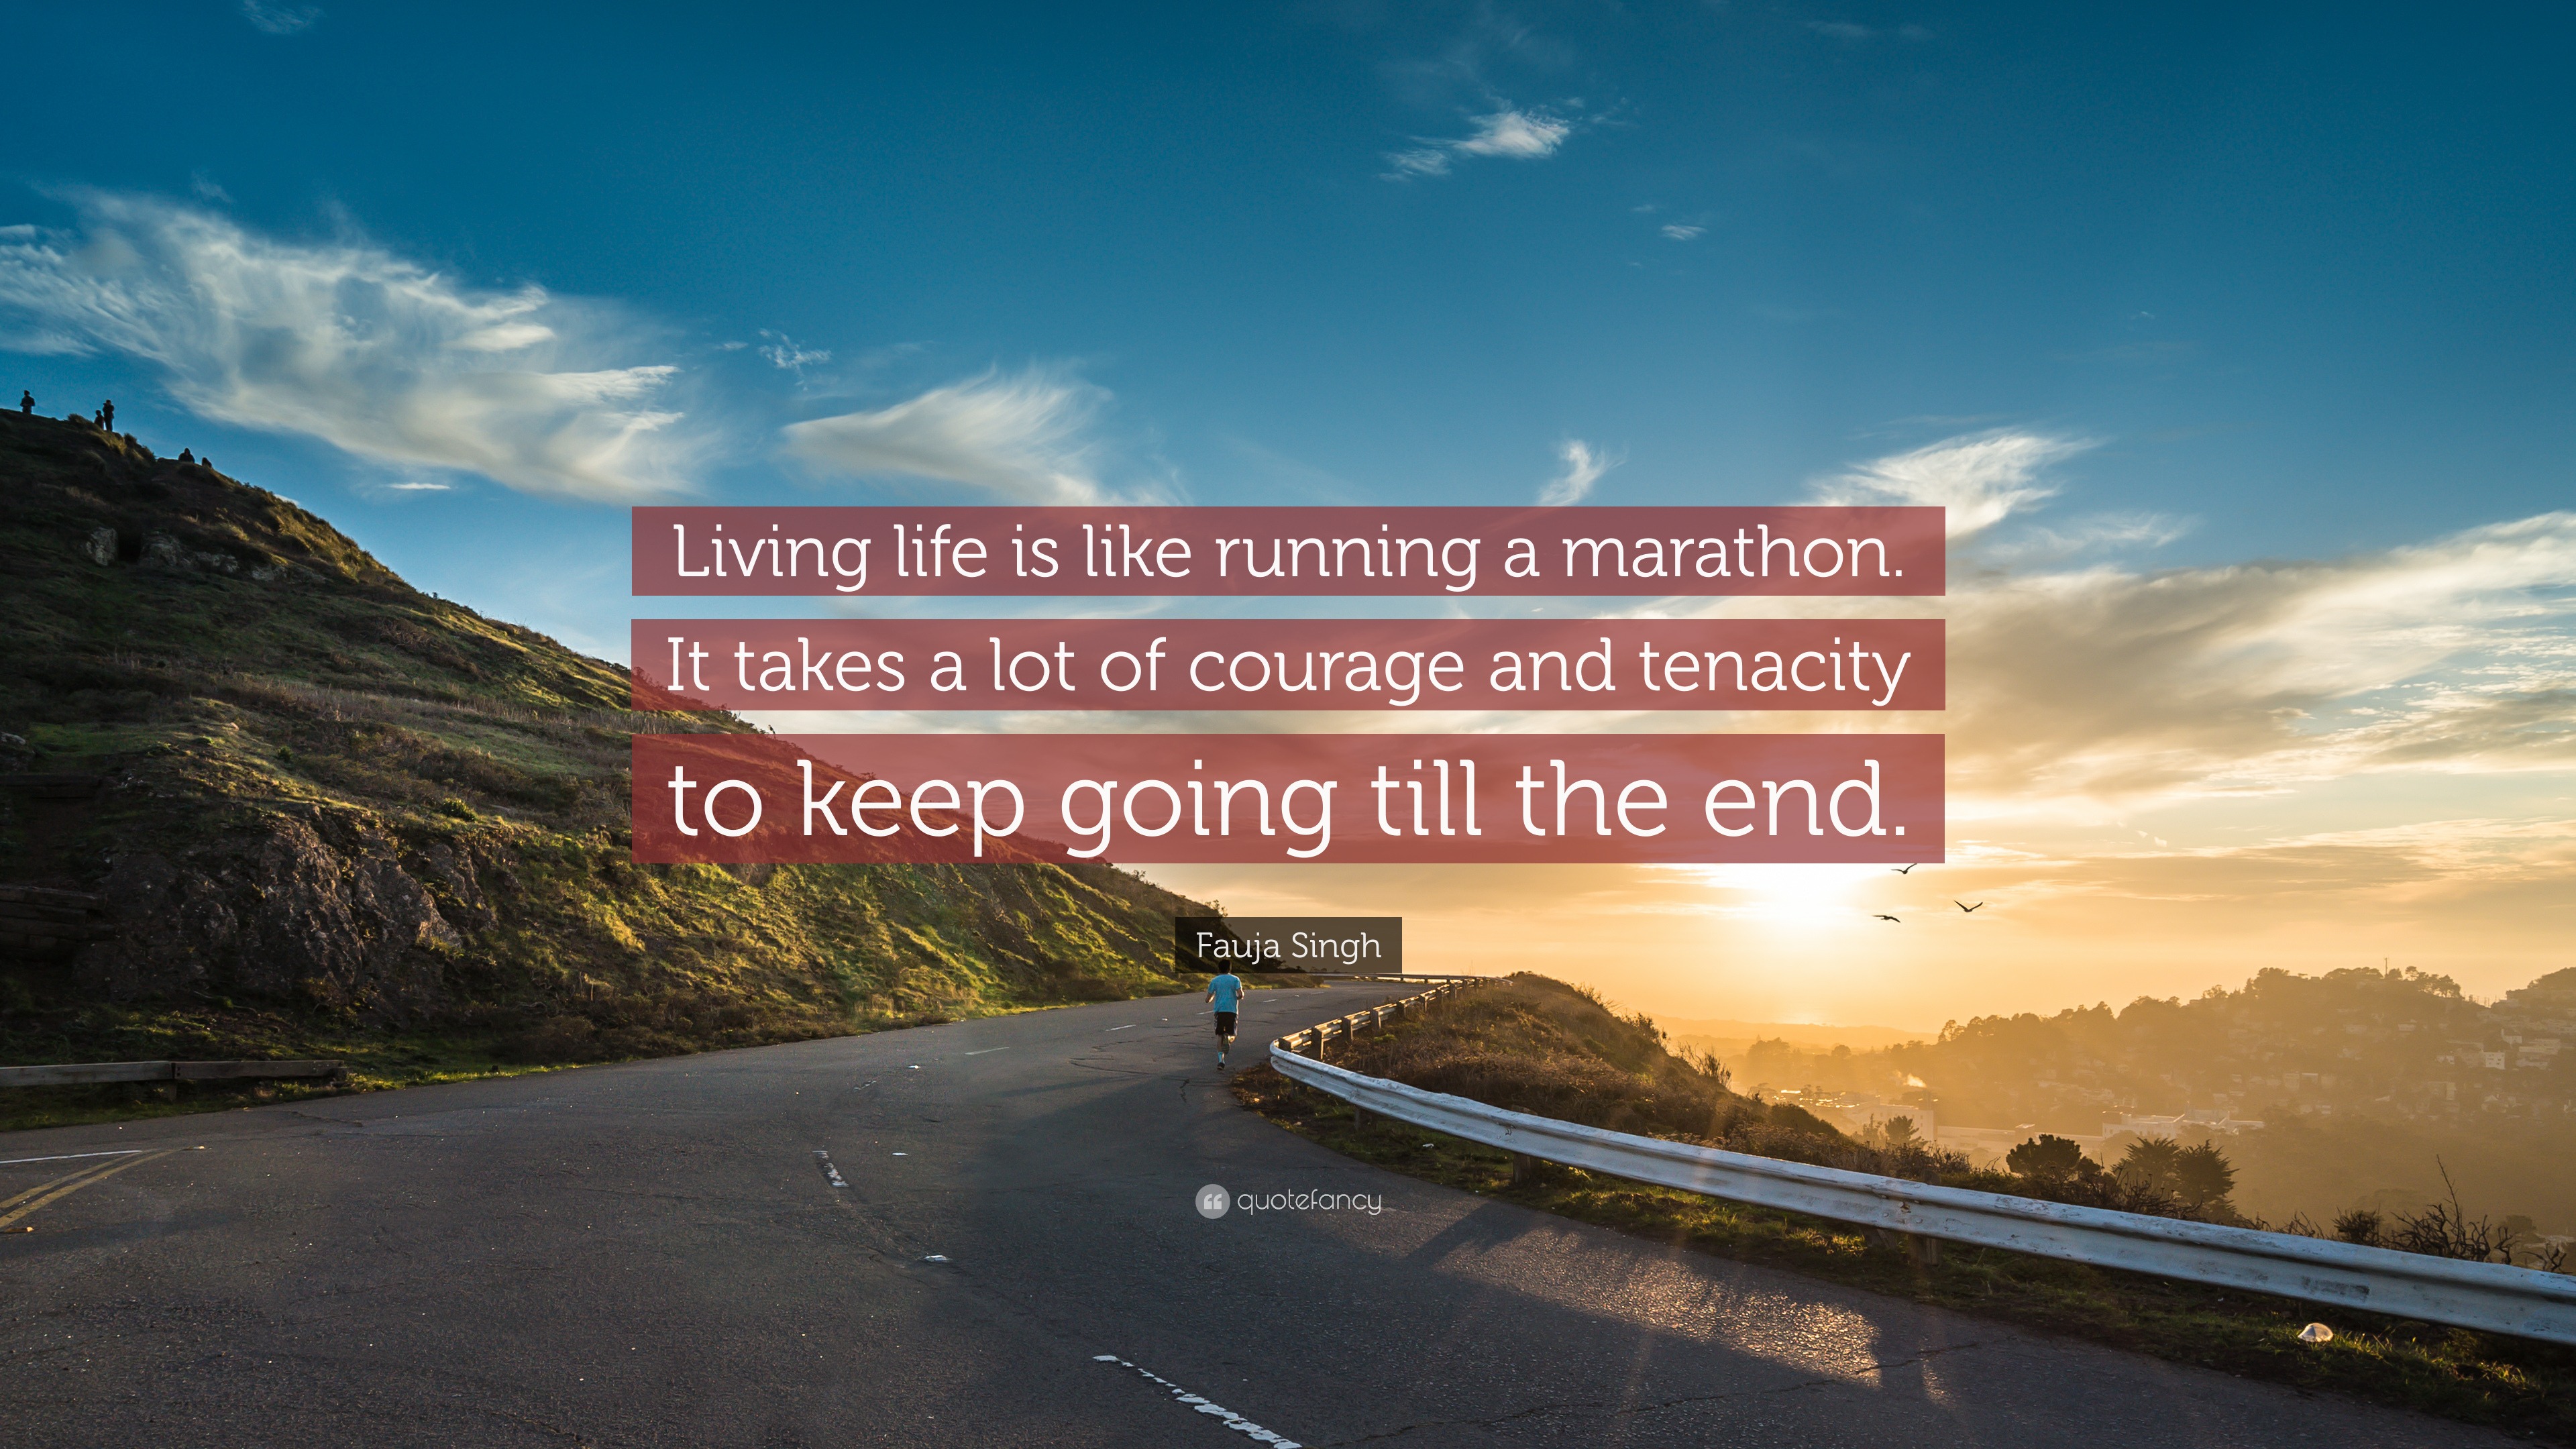 Fauja Singh Quote “Living life is like running a marathon It takes a